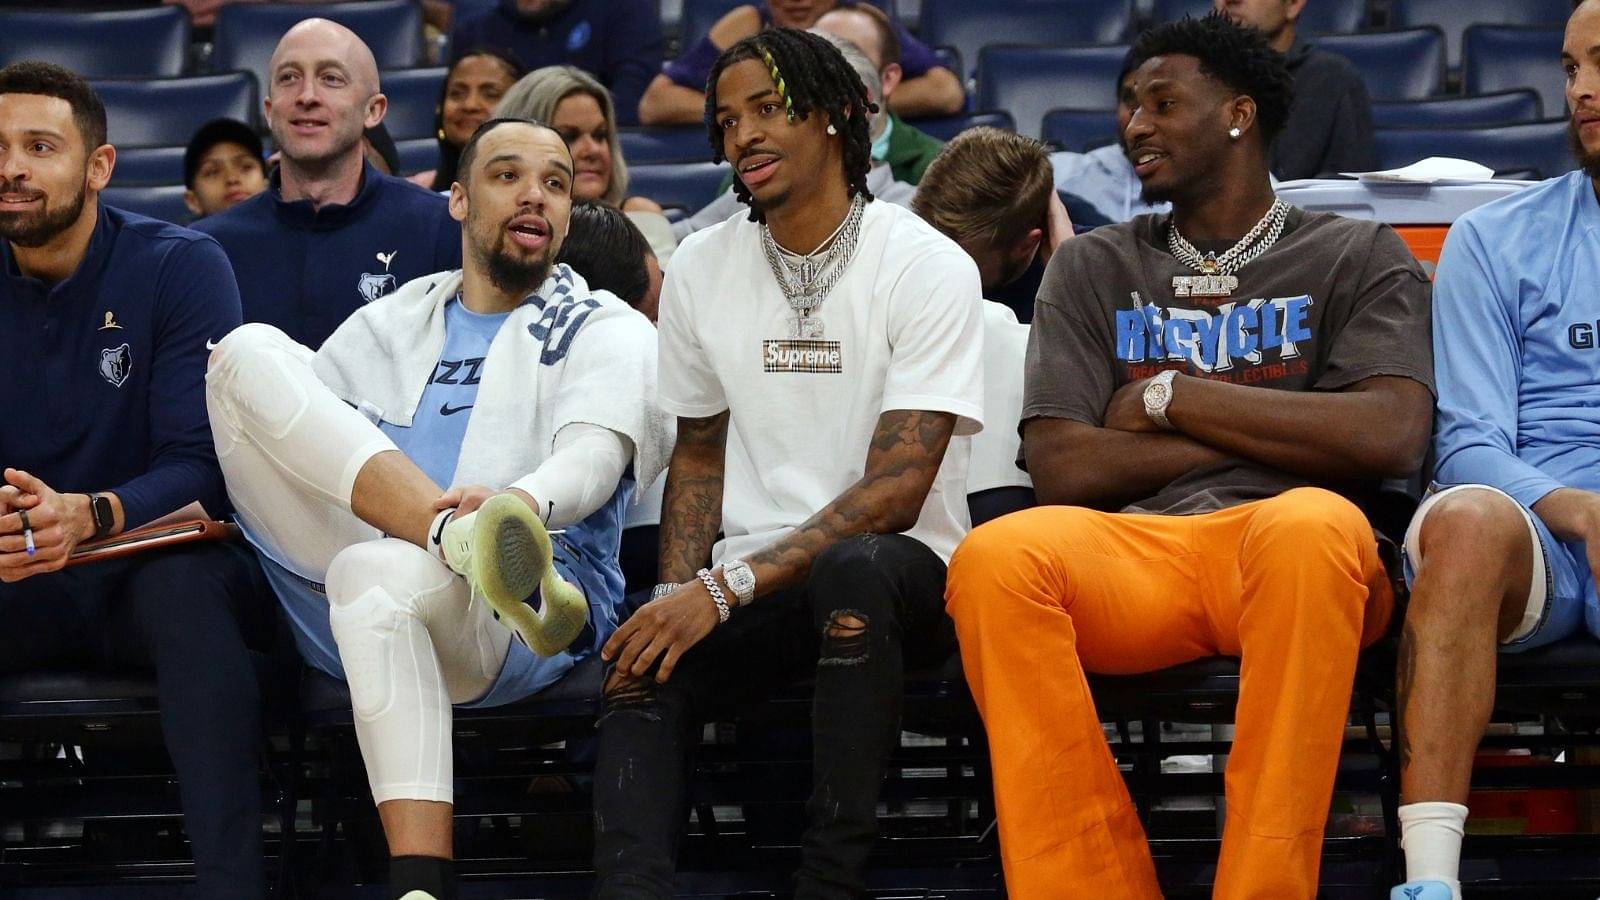 “Grizzlies are 18-2 without Ja Morant this season!? I can't be happier for my guys”: Memphis MVP frontrunner is excited about his team’s performance without him